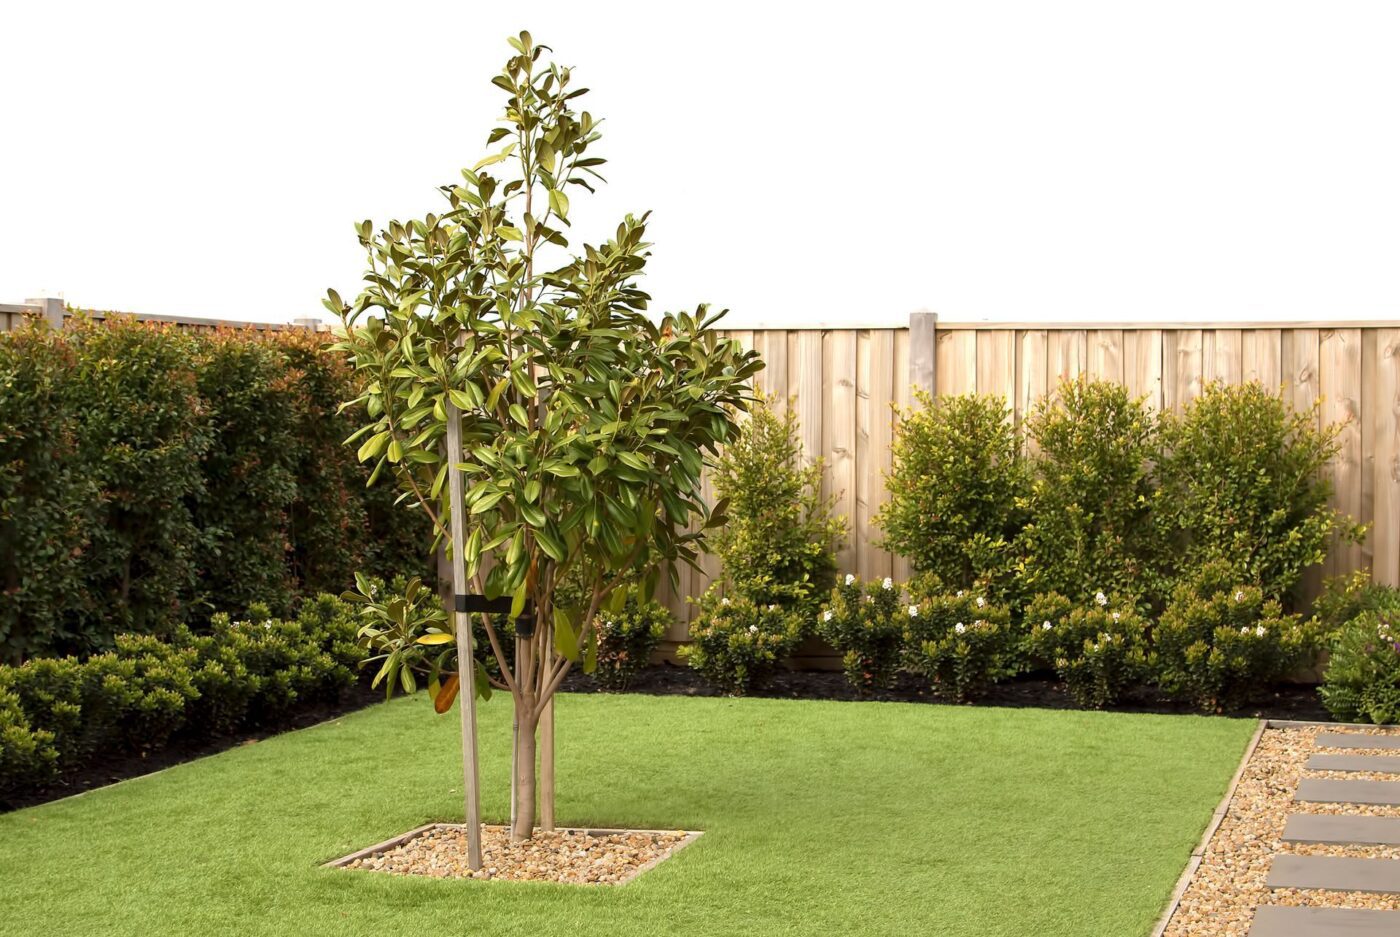 A small tree stands in the center of a neatly manicured backyard with lush green artificial grass from Jacksonville Artificial Turf. The tree is surrounded by a square patch of gravel. In the background, there's a wooden fence and a row of green bushes lining the perimeter, reminiscent of Neptune Beach, FL.